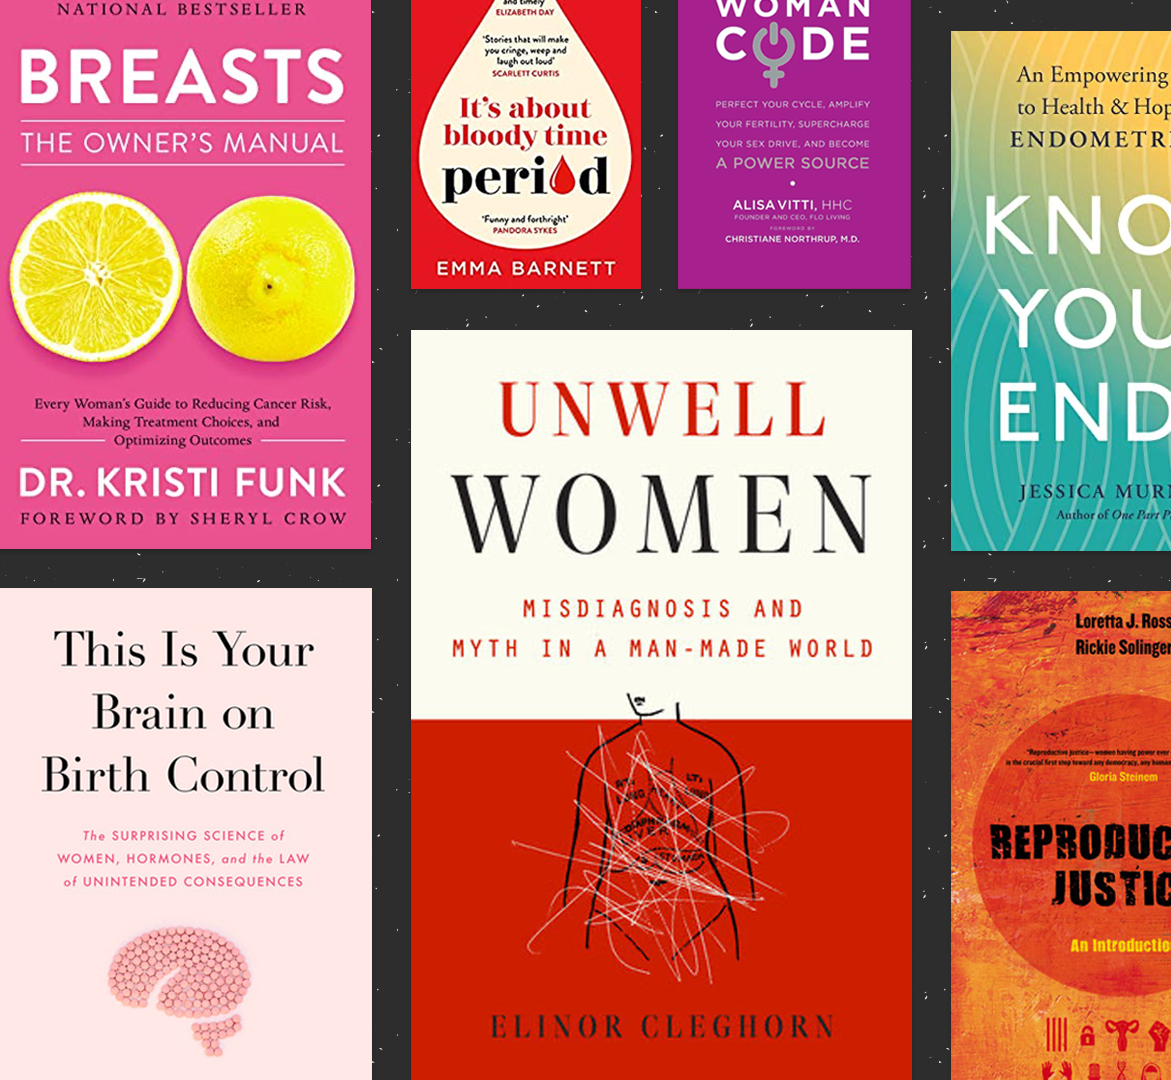 11 Essential Books About Women's Health, Written by Women - The Helm